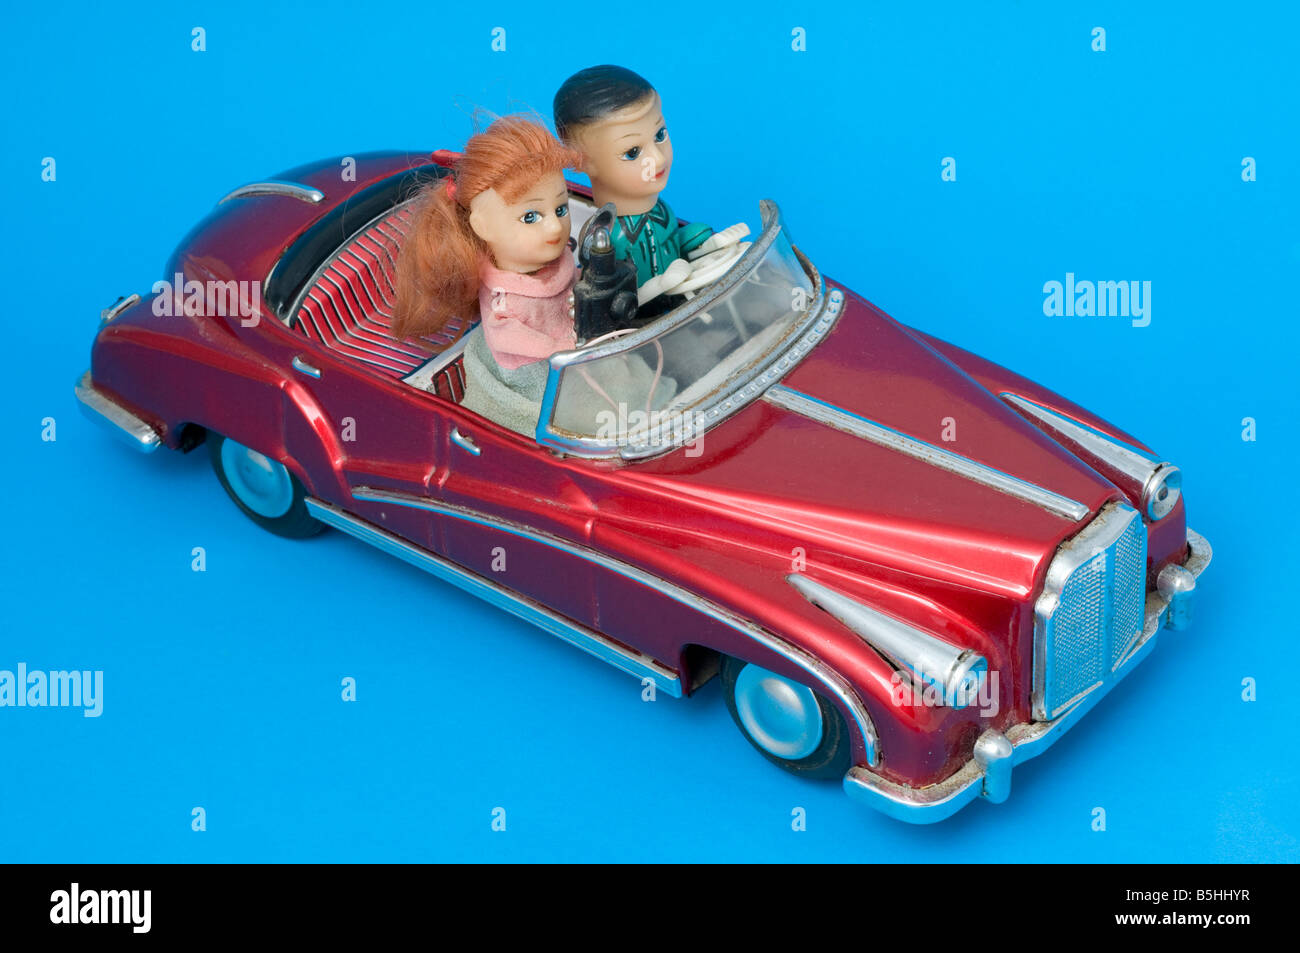 Pressed metal novelty toy battery powered car with driver sitting beside a woman photographer with camera and flash. Stock Photo